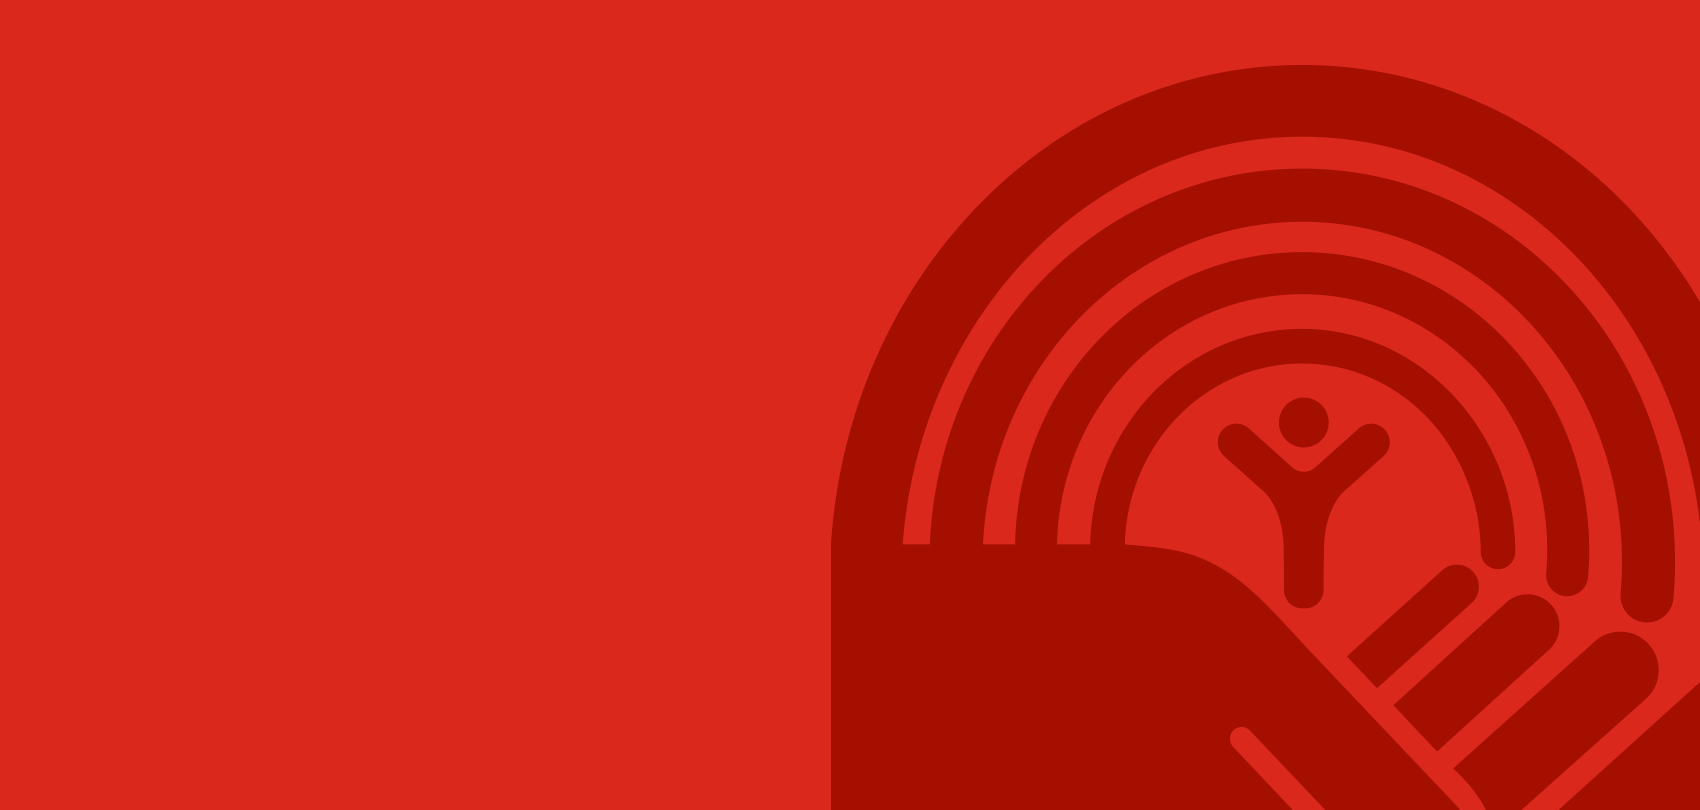 The United Way logo on a red background.